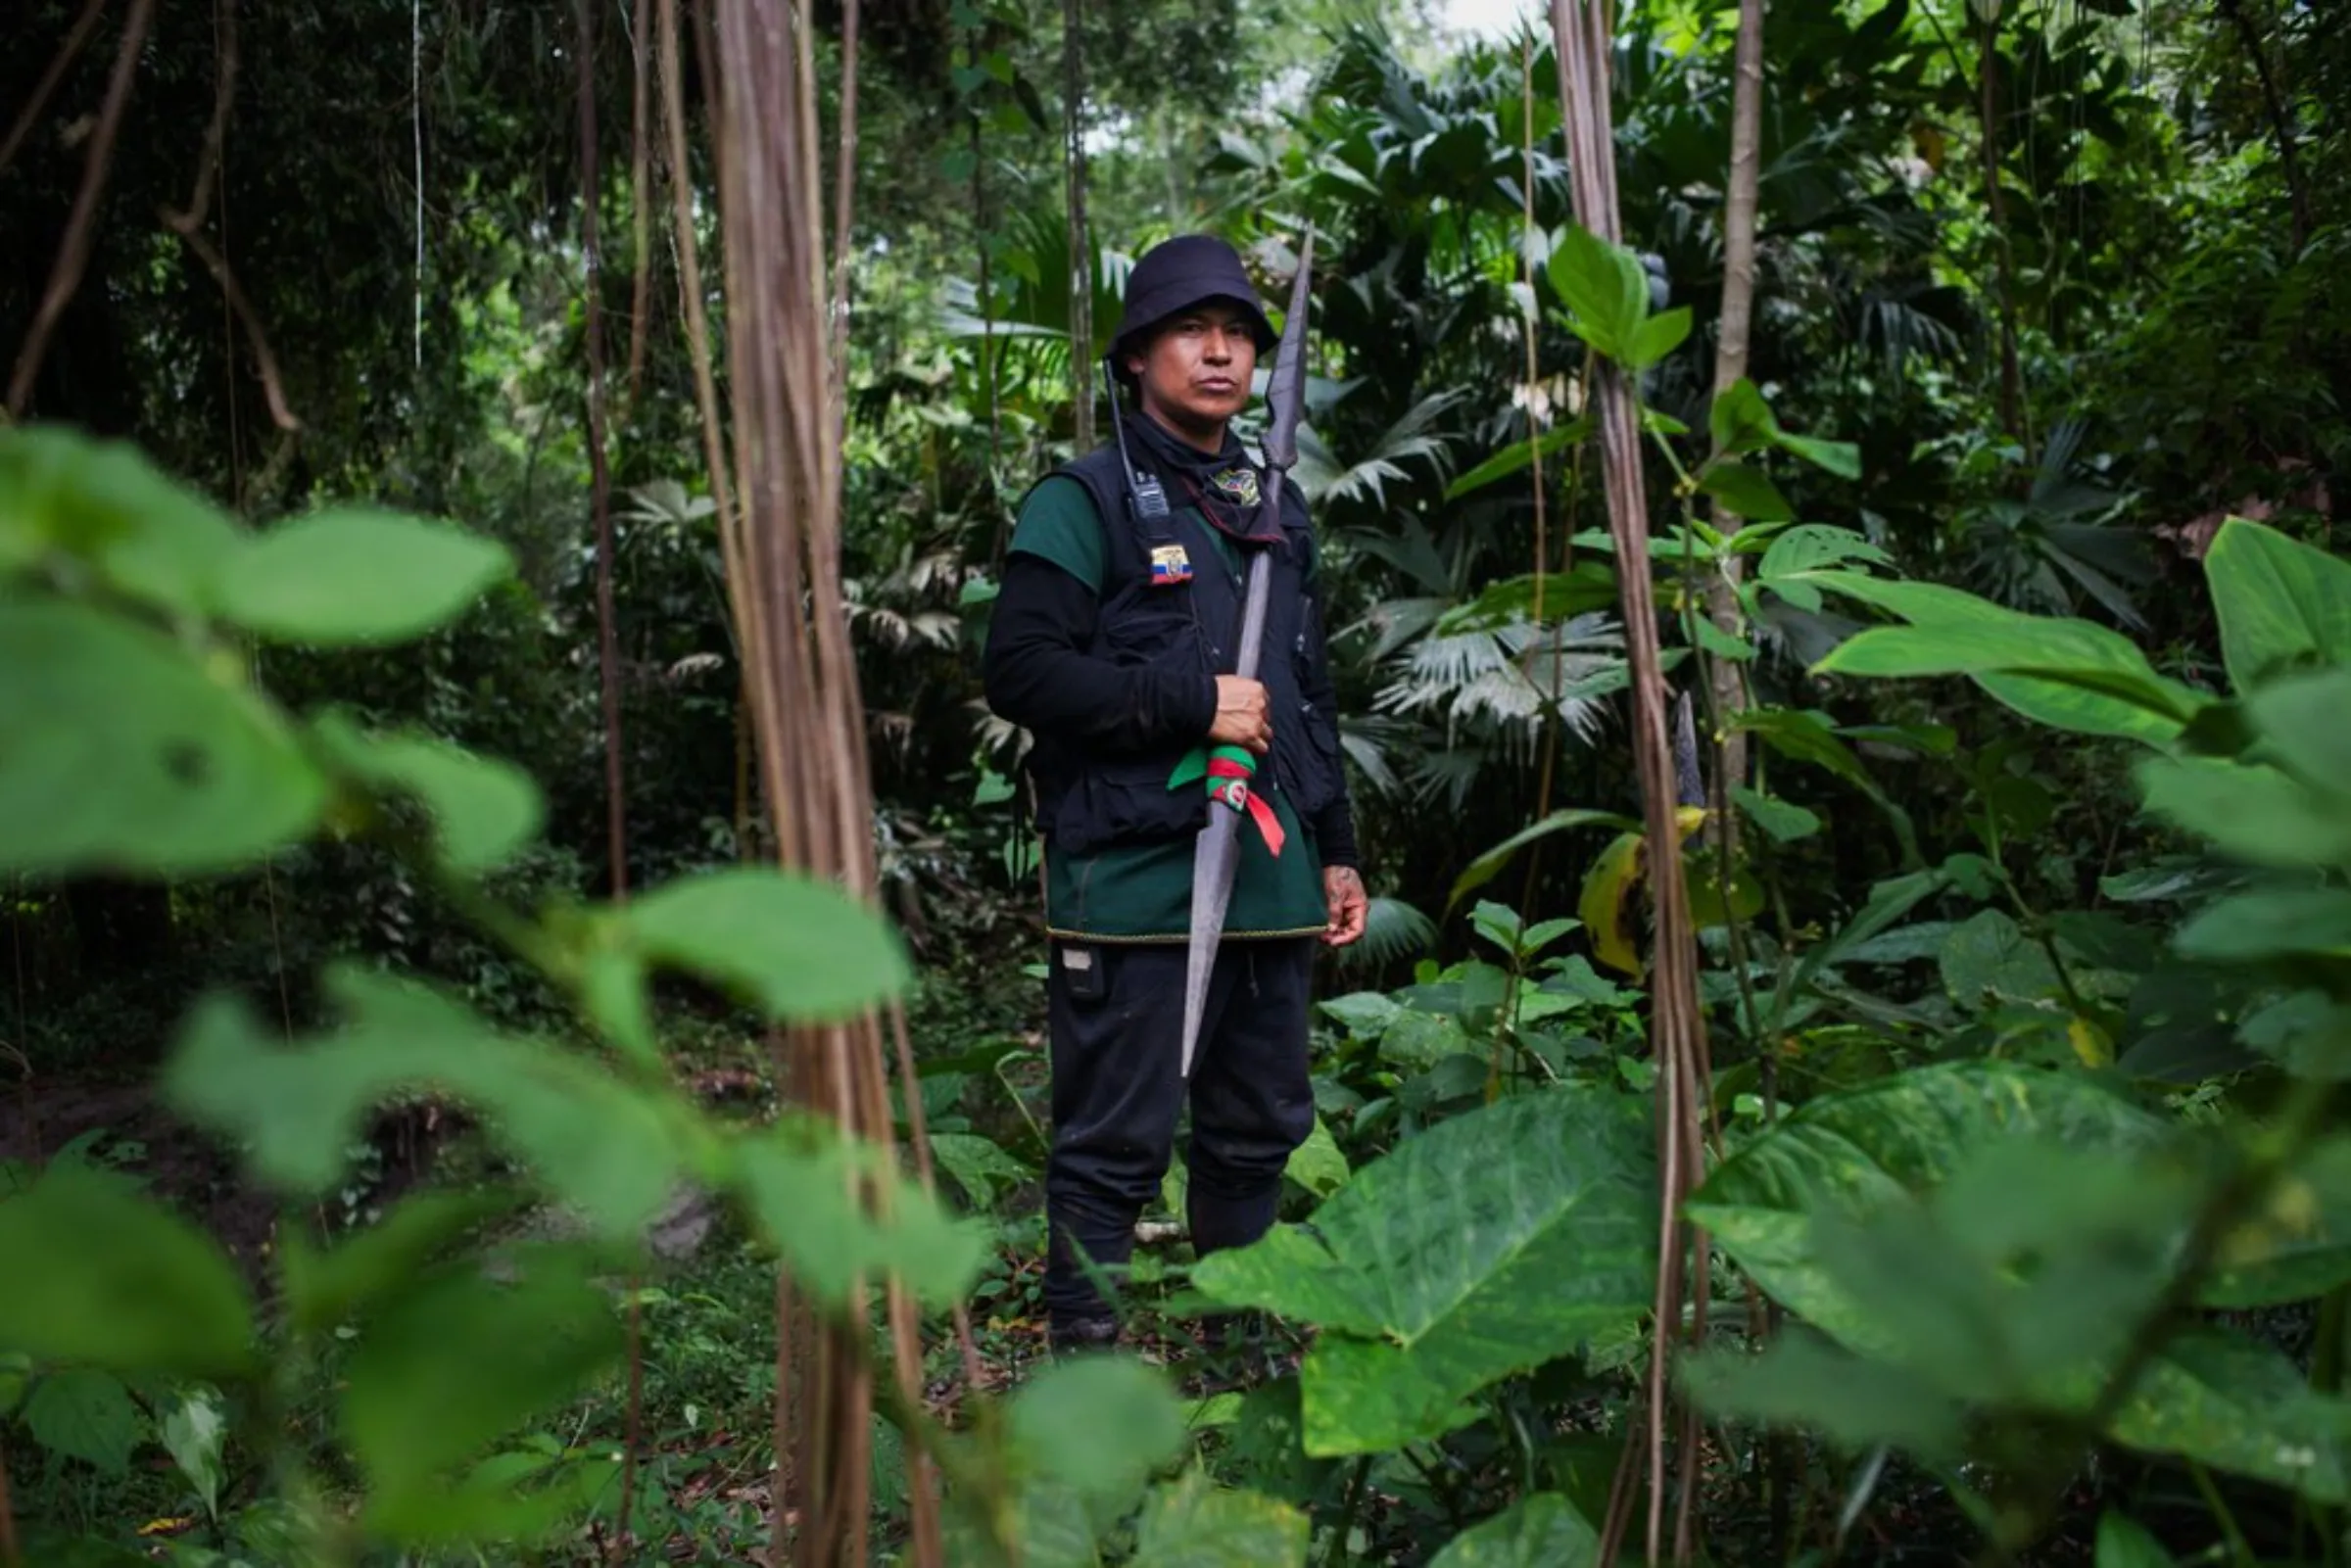 Marcelo Lucitante, a member of the Cofan indigenous guard, in the Amazon rainforest in northern Ecuador, holds a spear while on patrol near his village of Sinangoe, on April 21, 2022. Indigenous guards patrol their ancestral lands to keep illegal gold miners, poachers and hunters at bay